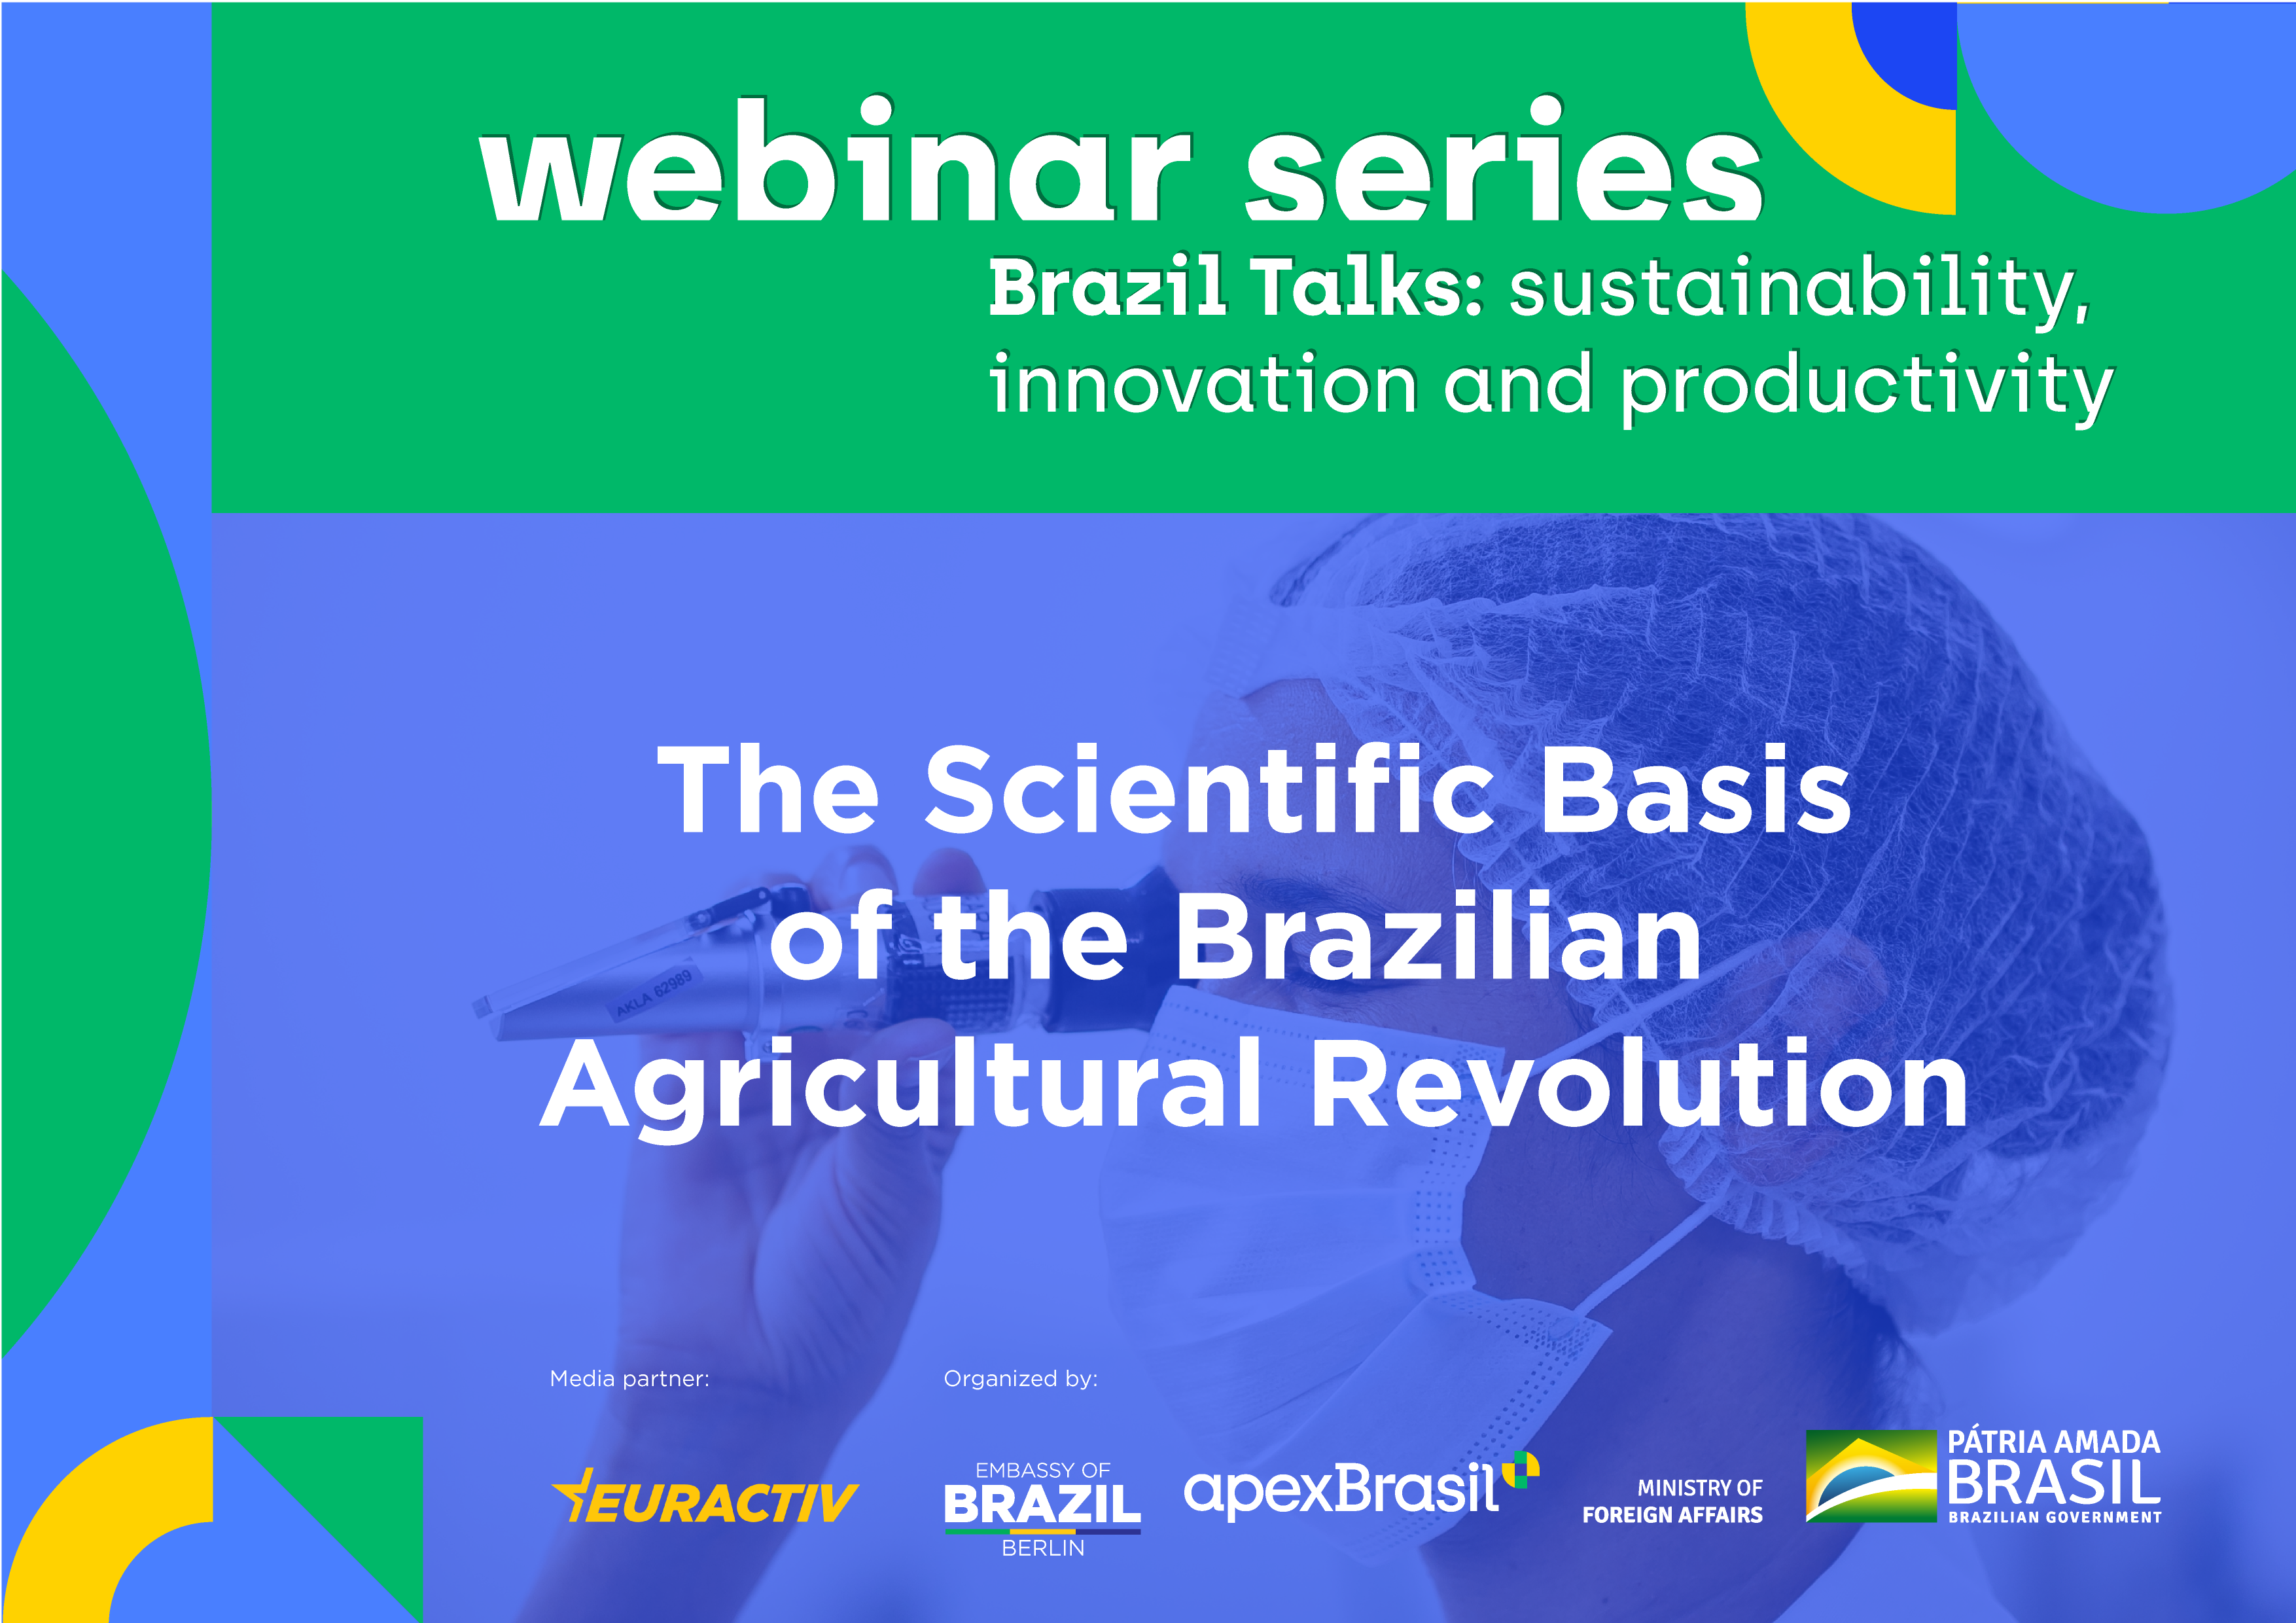 Media Partnership: The Scientific Basis of the Brazilian Agricultural Revolution